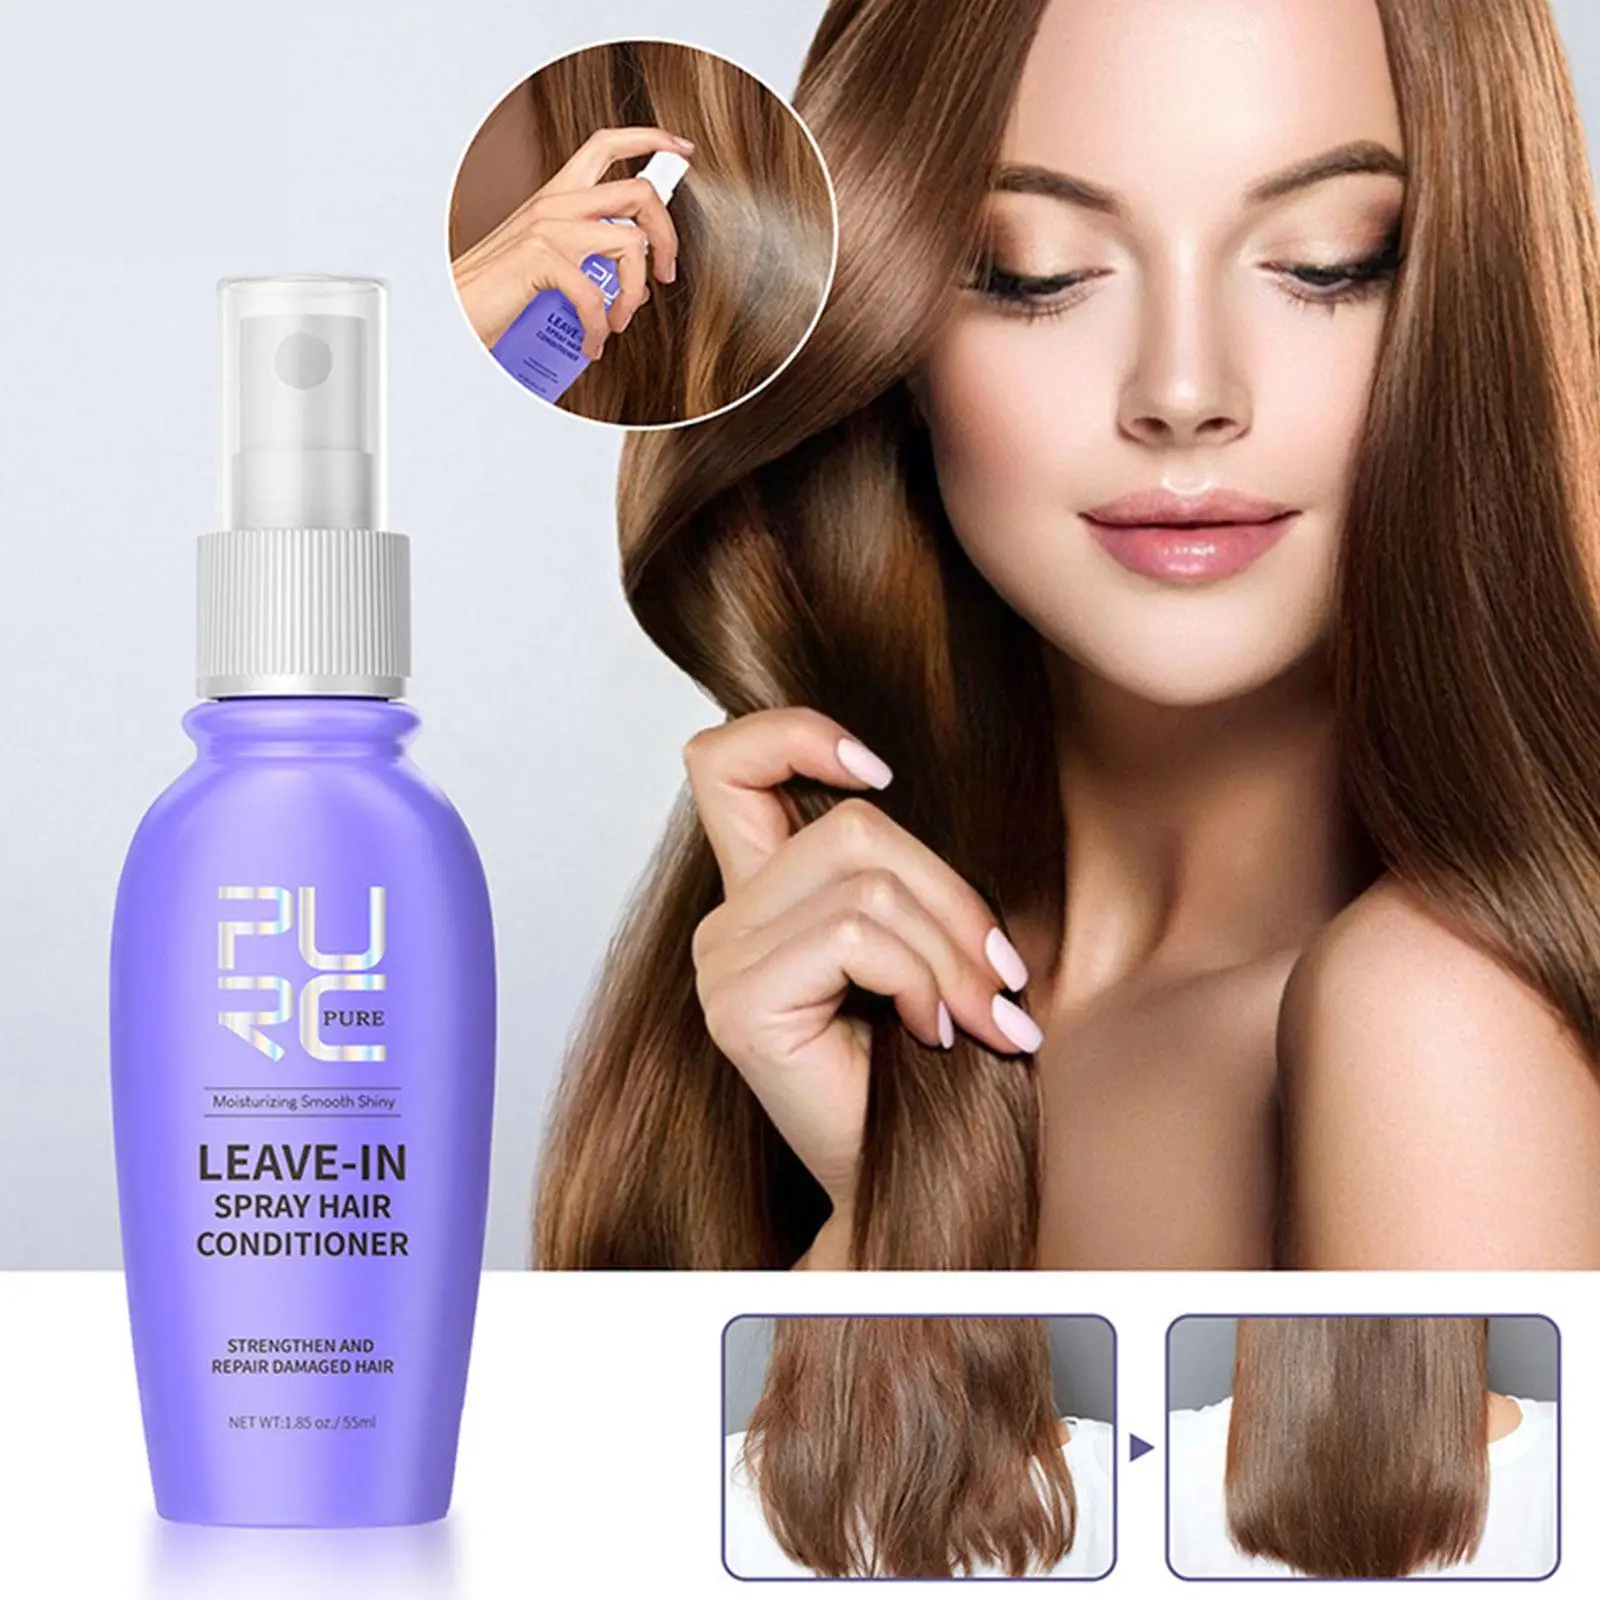 

Coconut Oil Leave-in Spray Conditioner Hair Treatment Straightening Hair Frizz Sprays Shiny Smooth Care 50ml Repair Dry A2m7